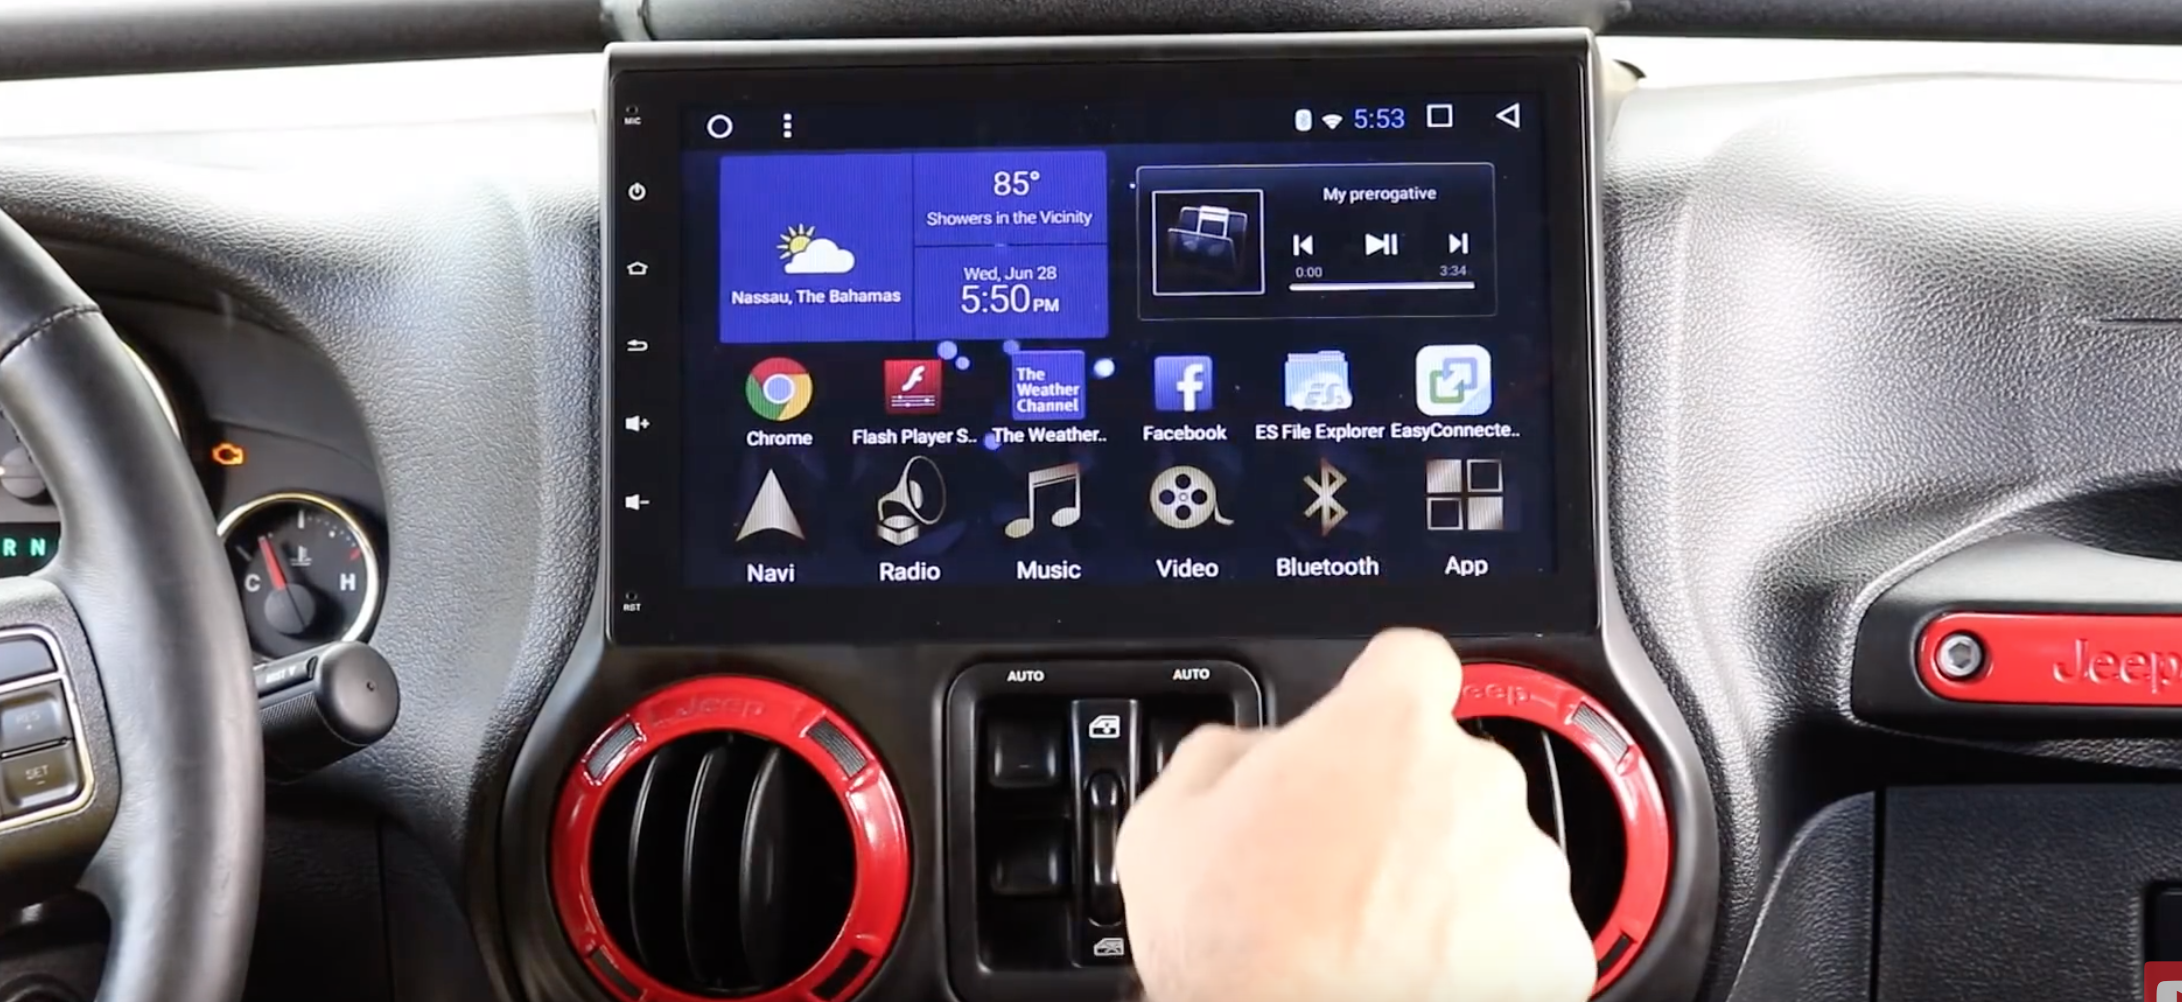  inch android quad core 2gb ram head unit - thoughts? | Jeep Wrangler  Forum